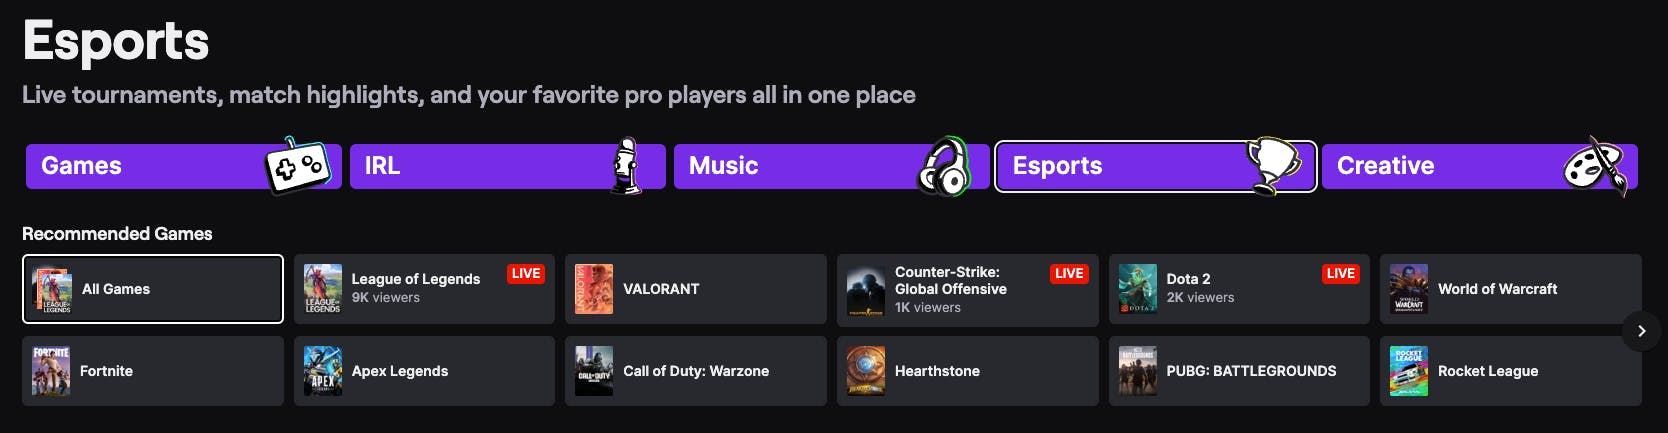 Screenshot of the Esports section on Twitch